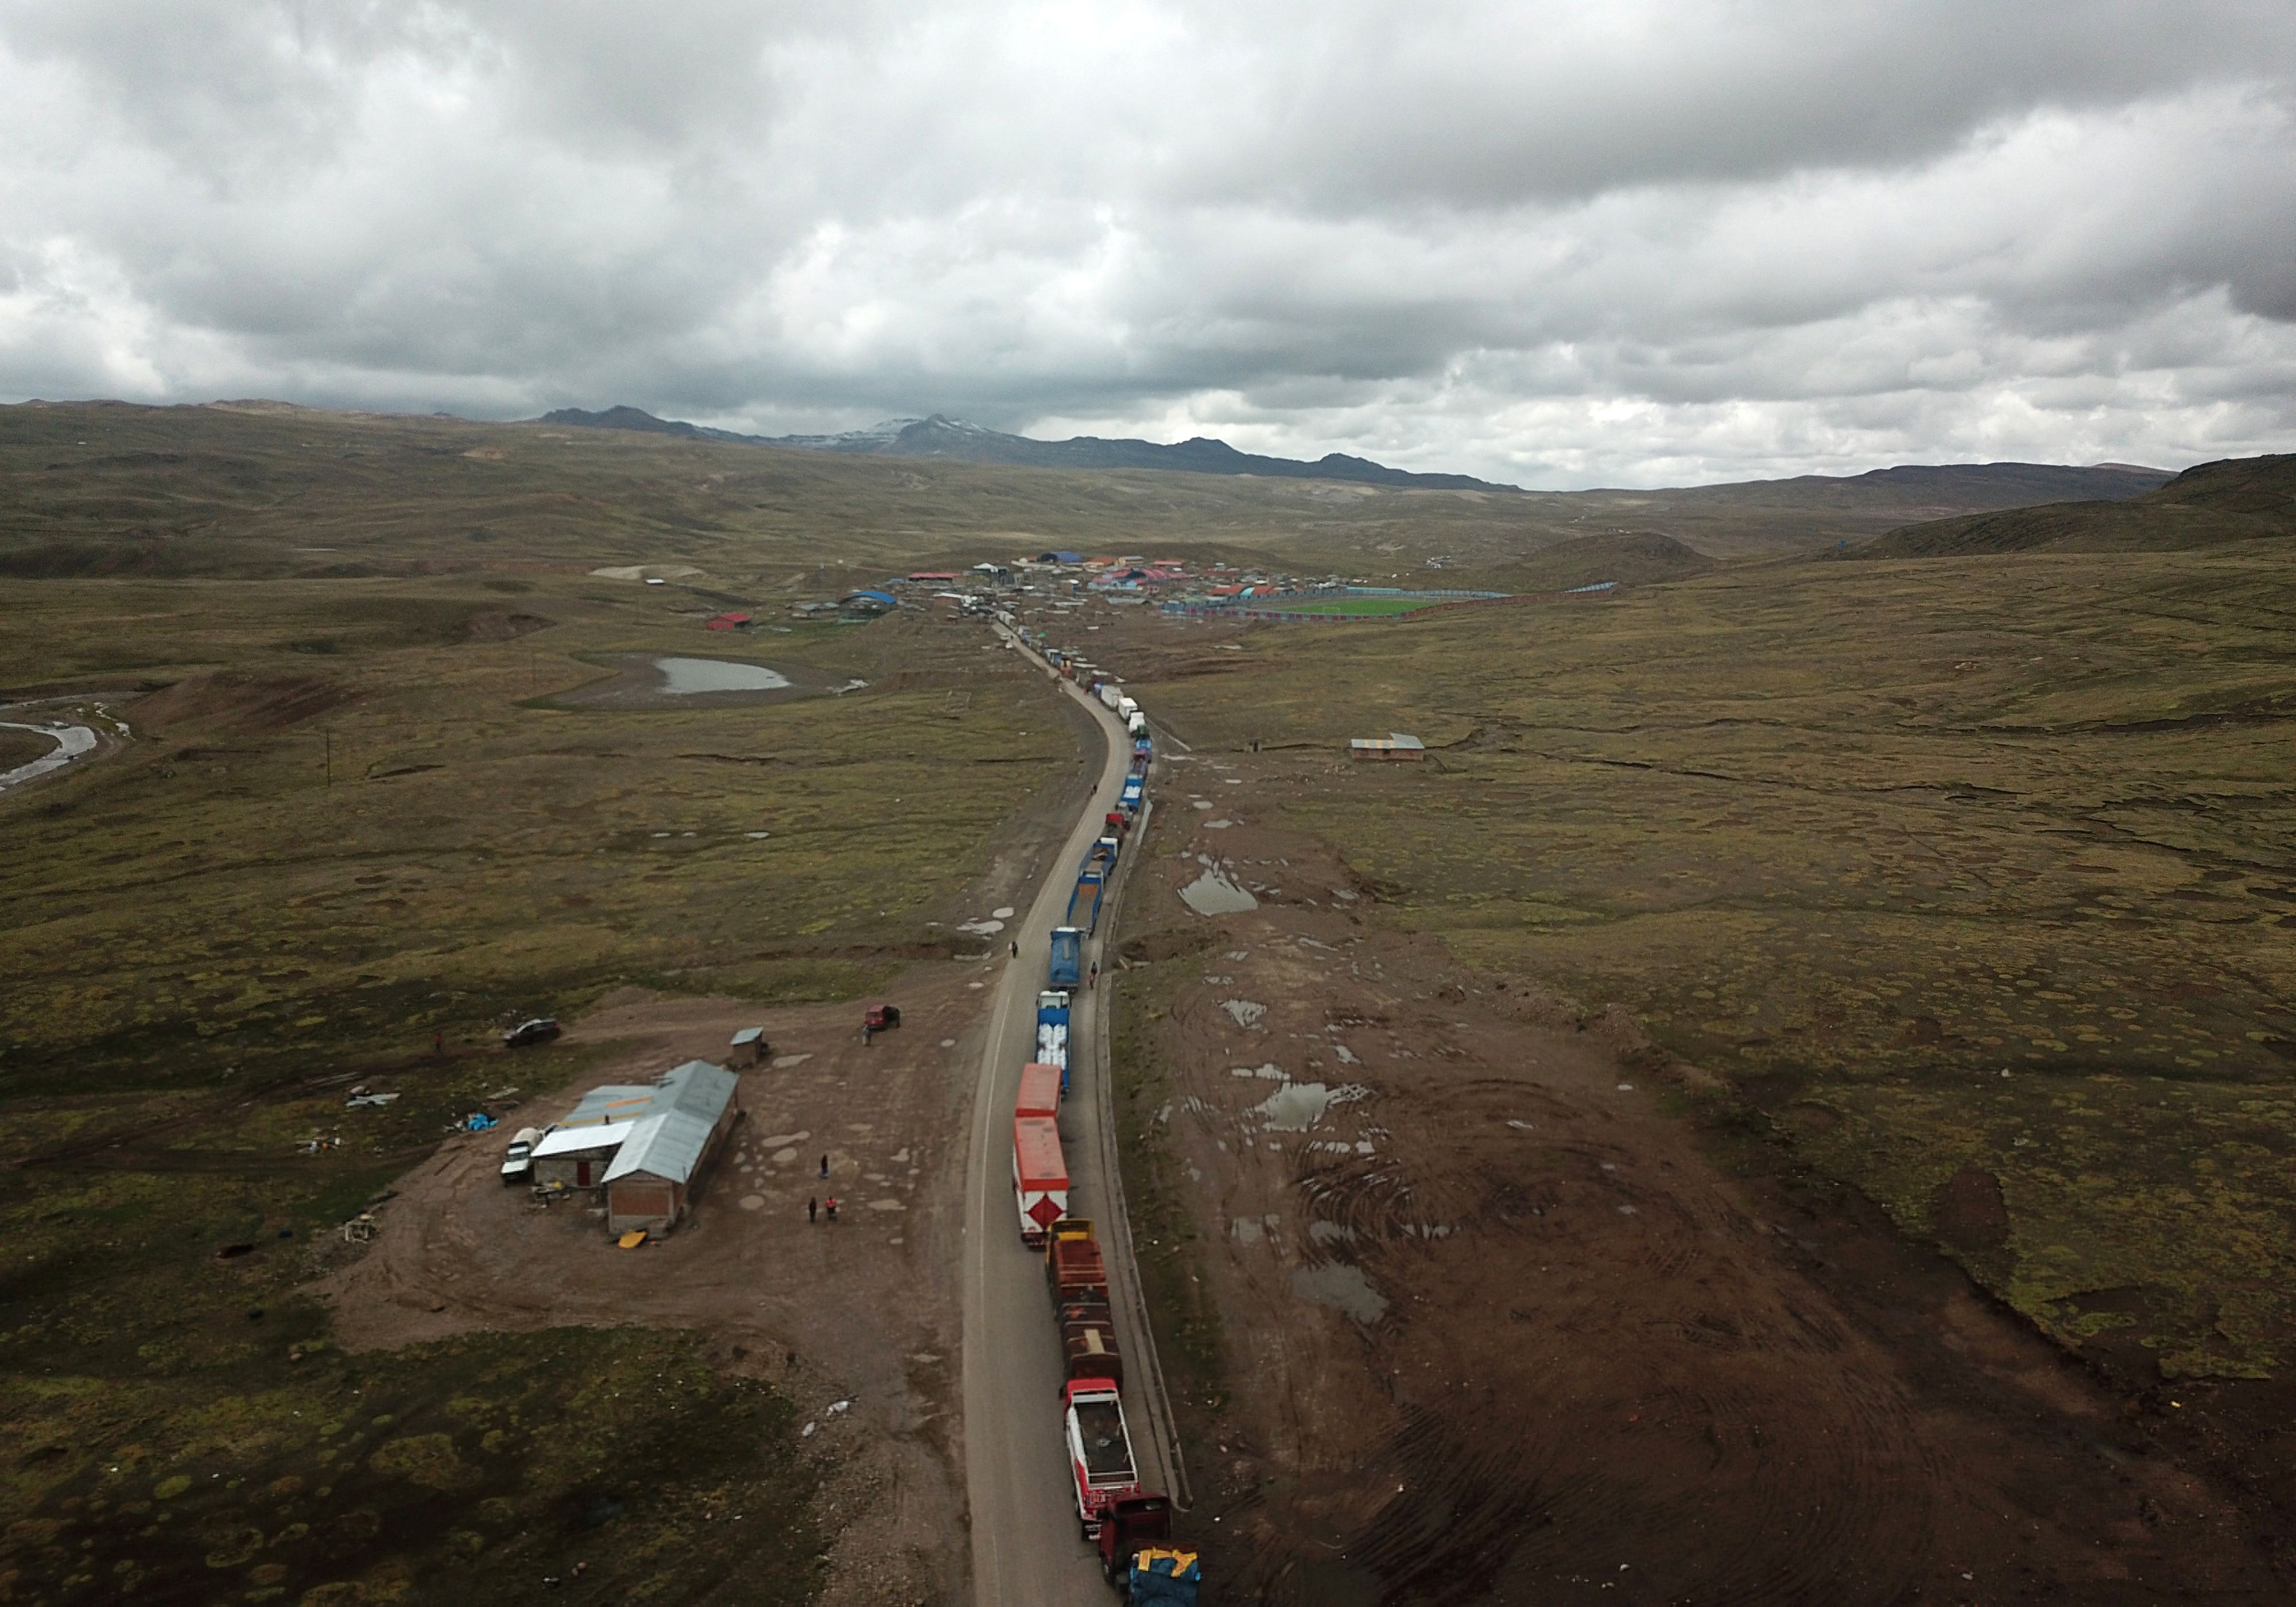 An aerial view of trucks stuck during a roadblock caused due to a demonstration by anti-government protestors, in Condoroma